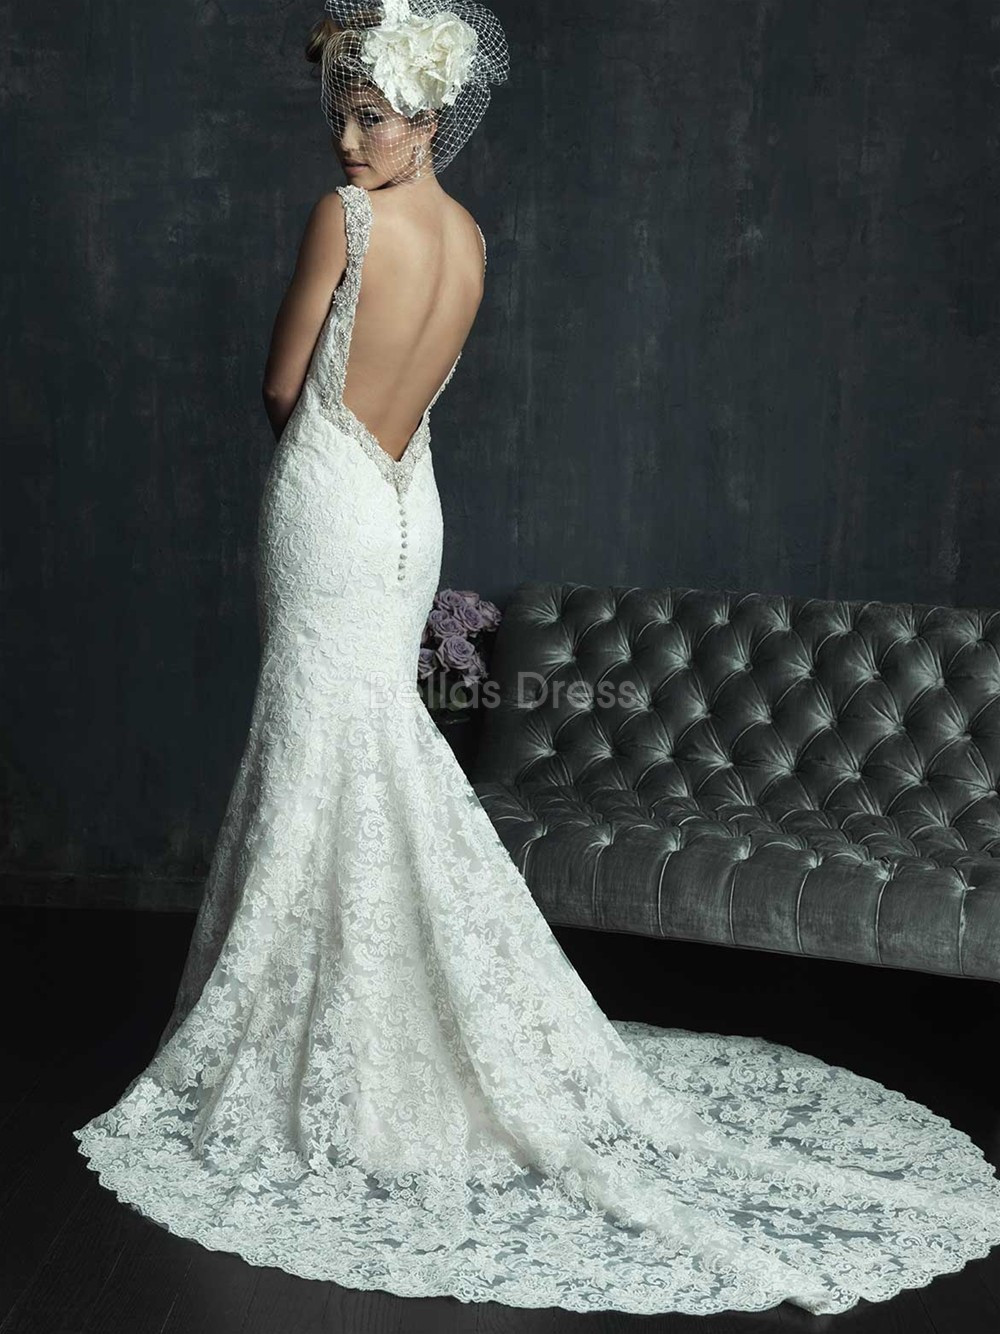 Backless Lace Wedding Dresses
 The Wedding Gown